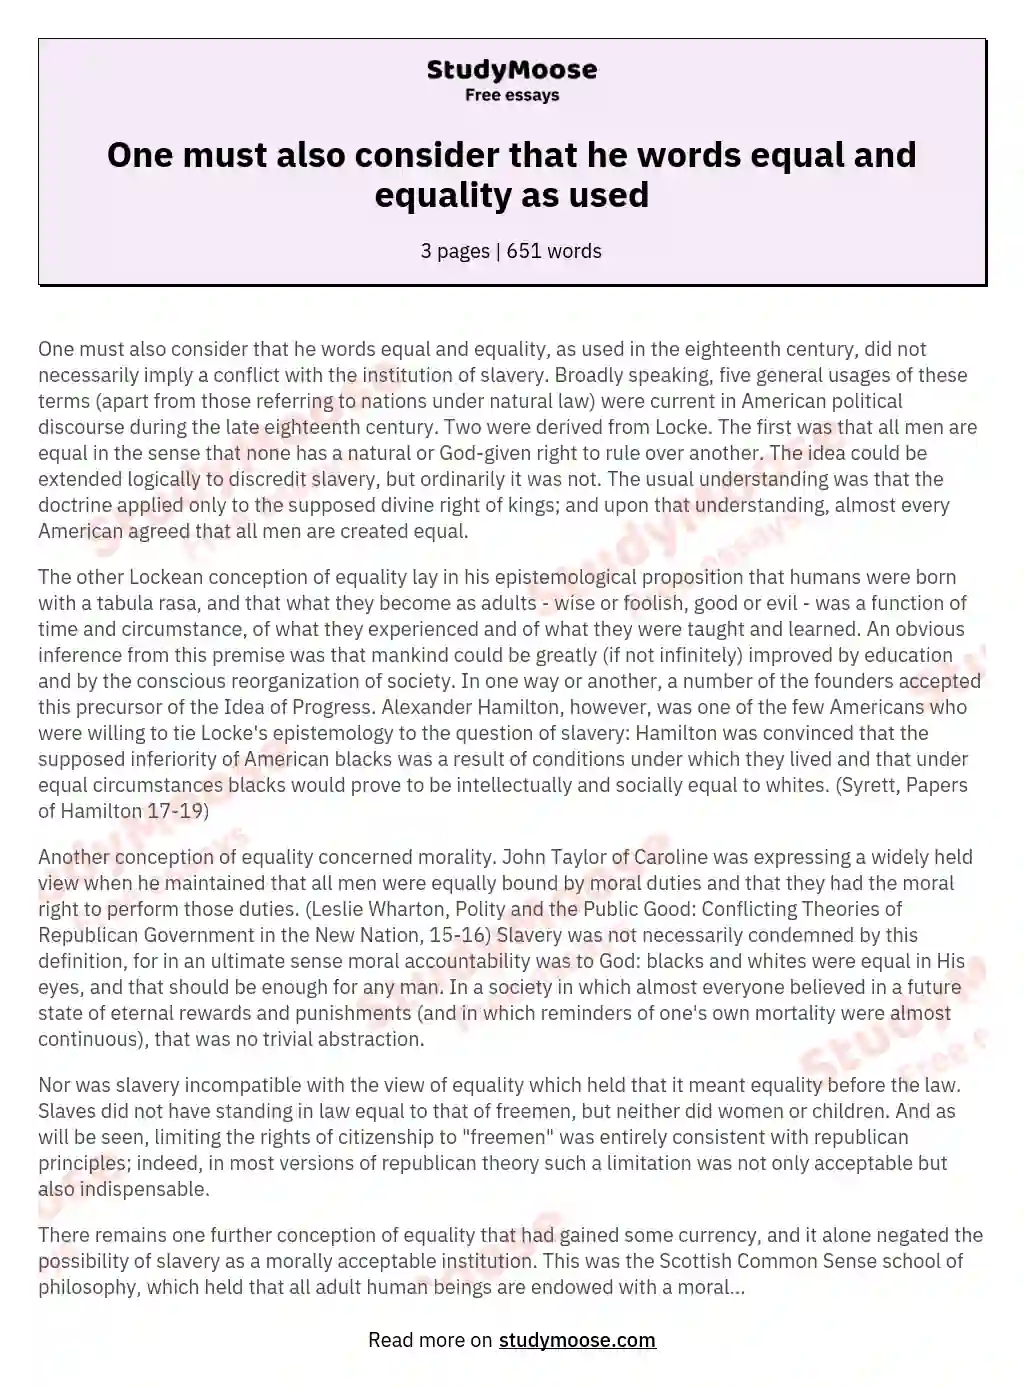 One must also consider that he words equal and equality as used essay